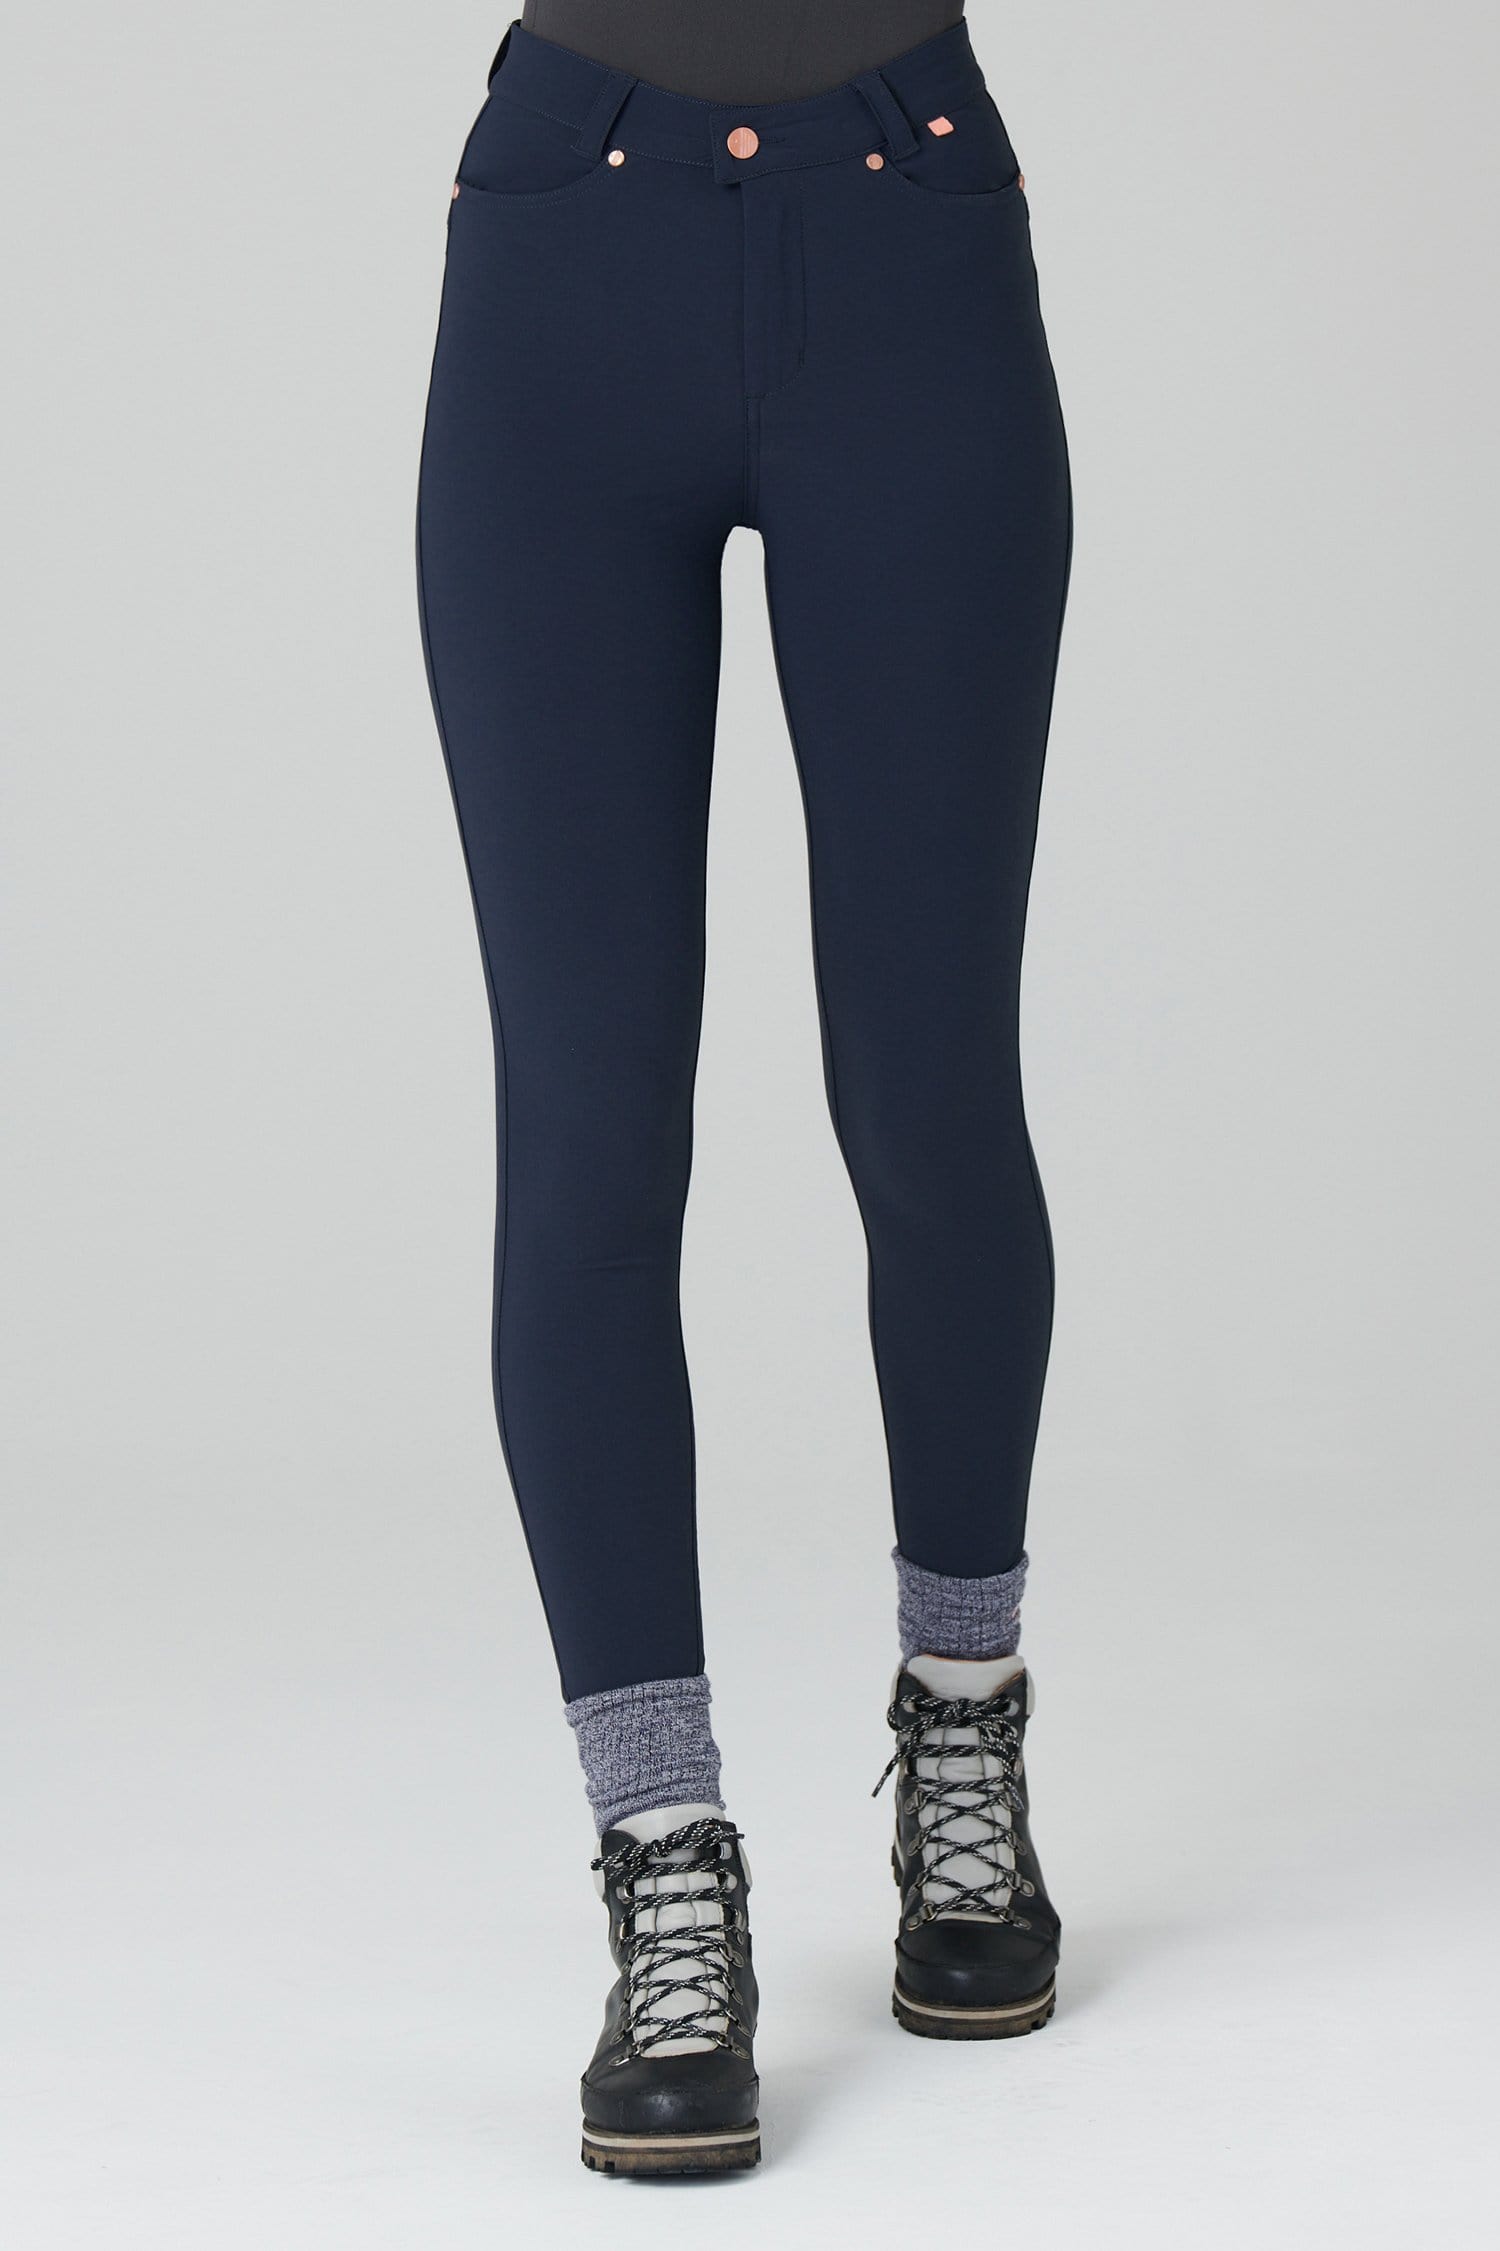 Thermal Skinny Outdoor Trousers - Deep Navy - 34p / Uk16 - Womens - Acai Outdoorwear